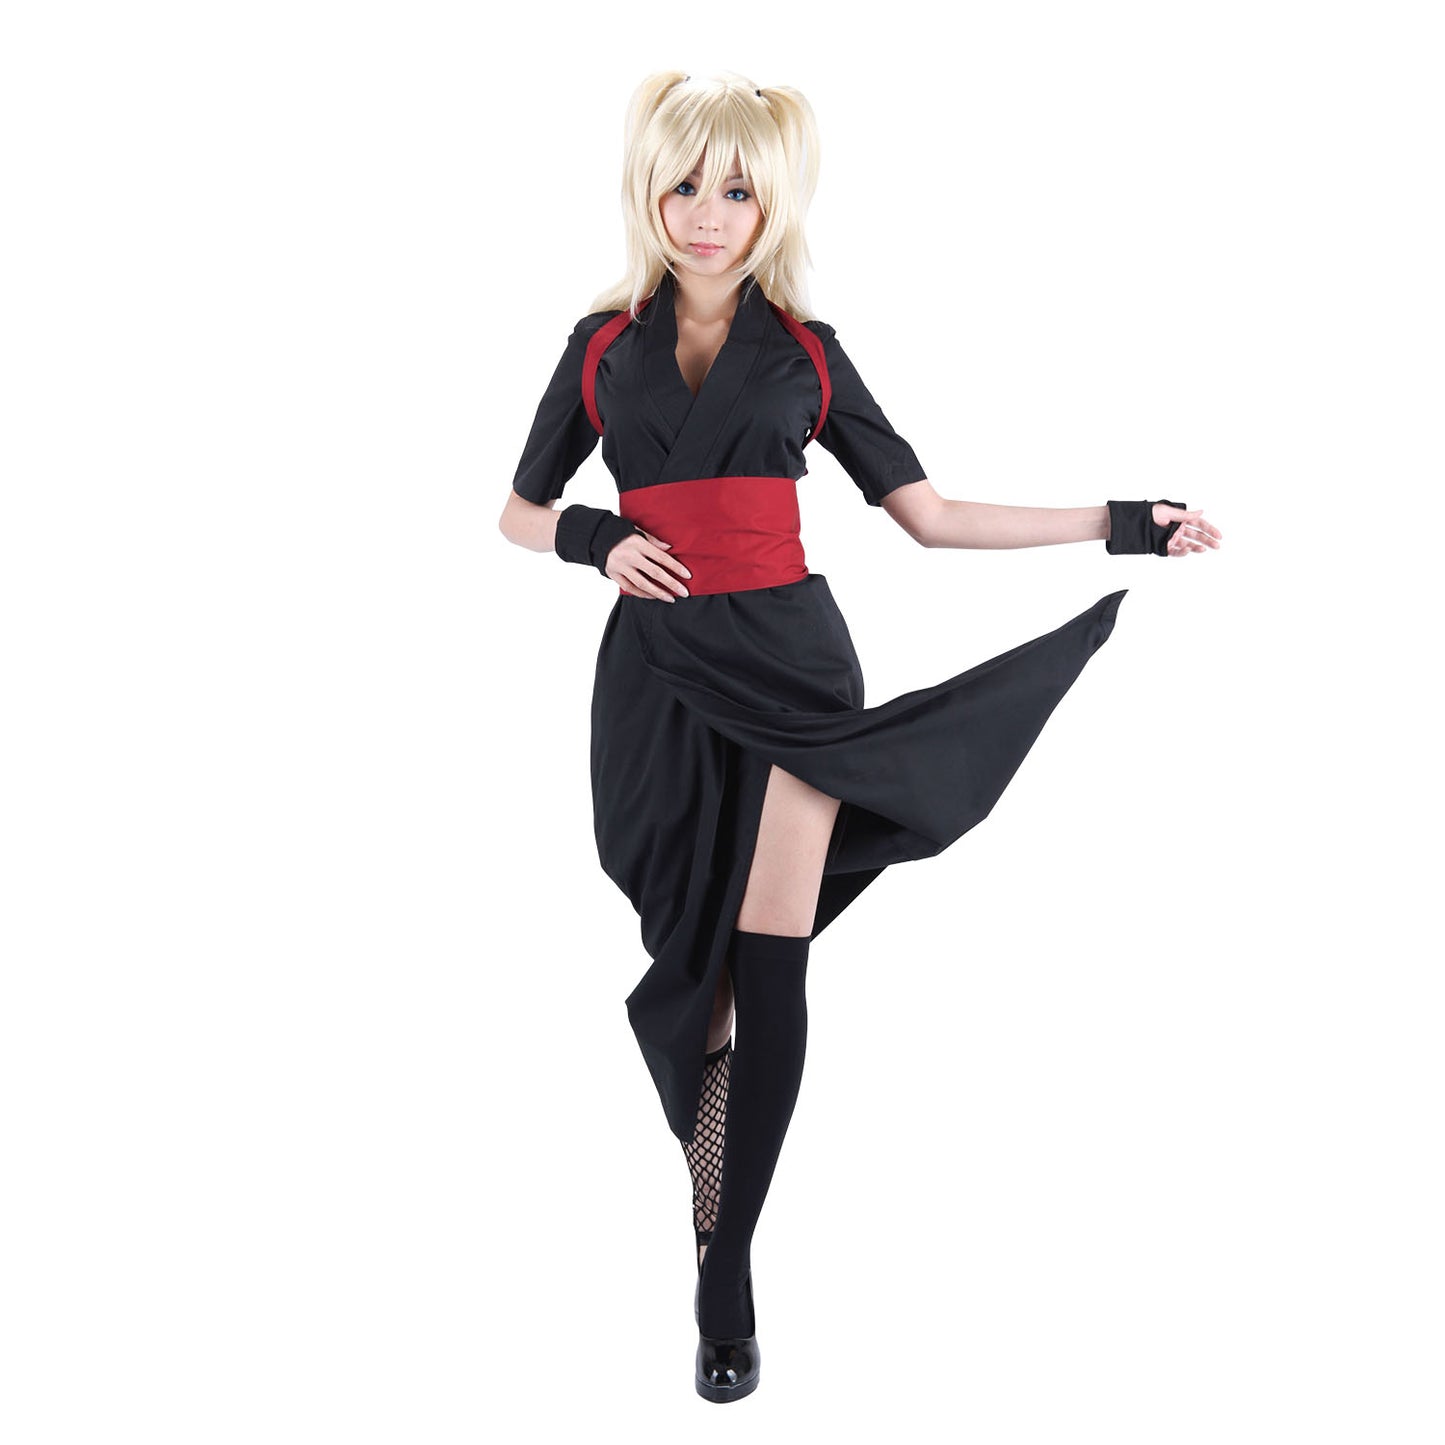 Naruto Shippuden Costume Temari Cosplay Black full Outfit for Women and Kids